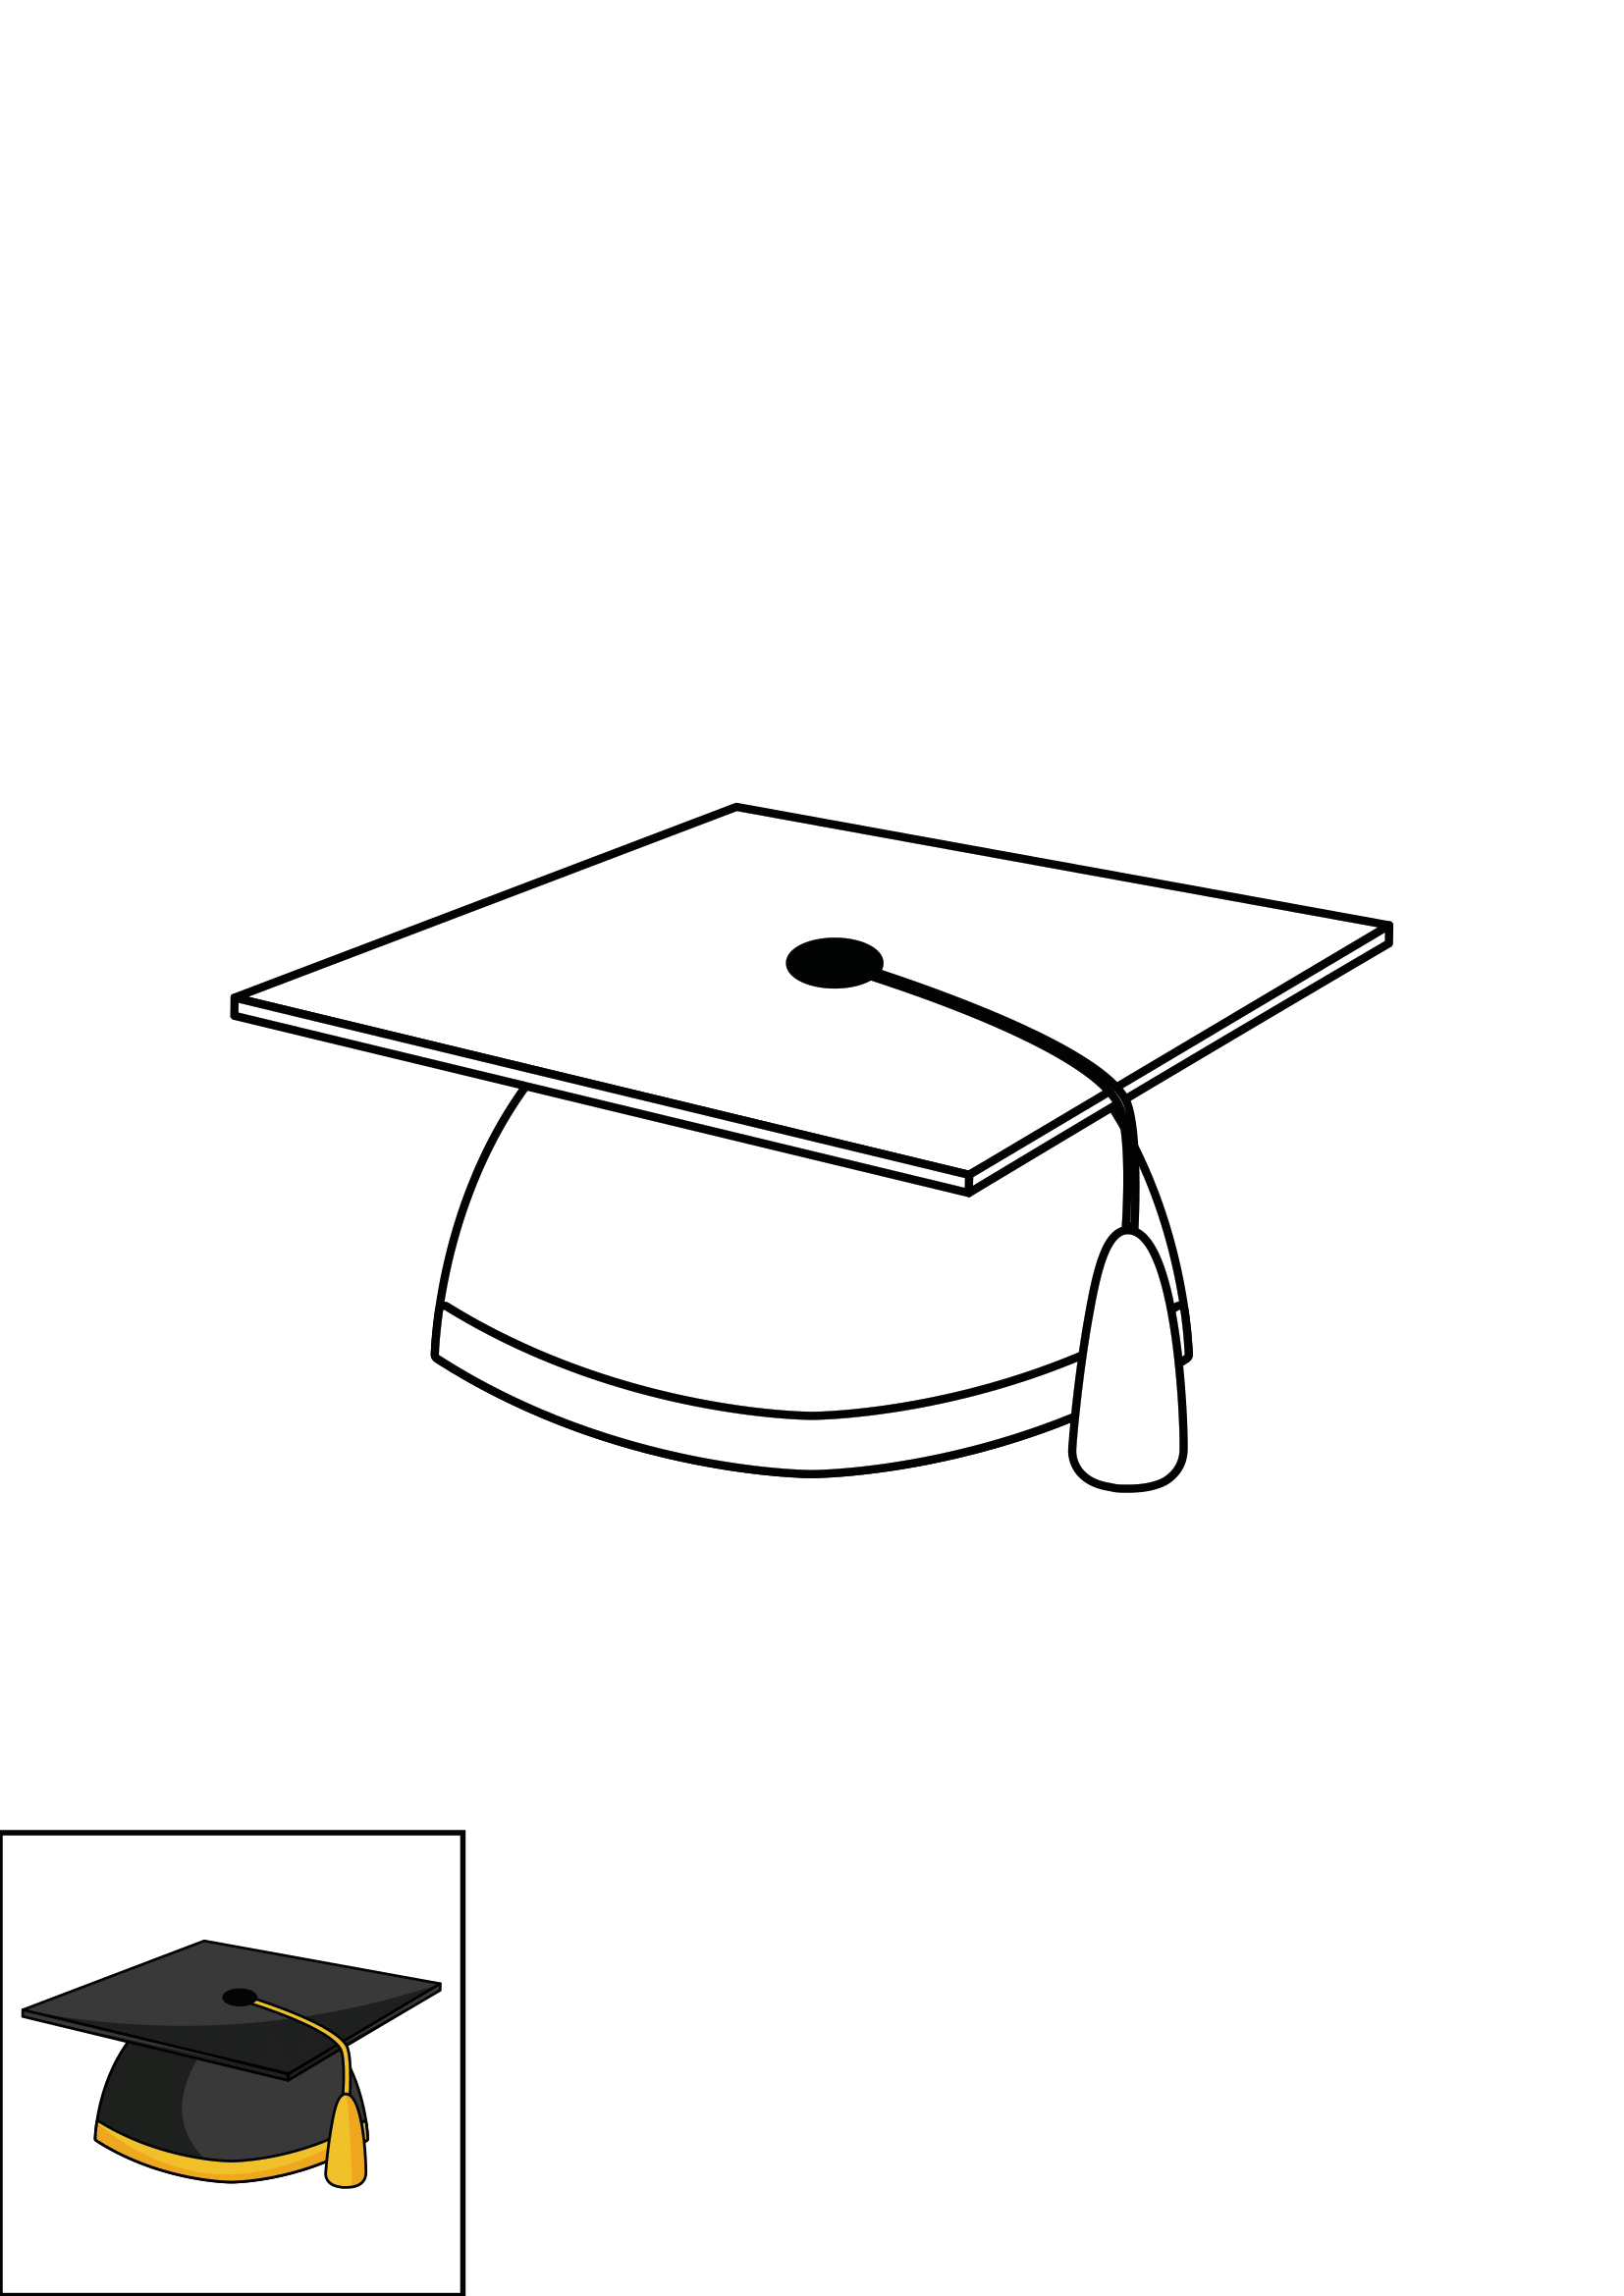 How to Draw A Graduation Cap Step by Step Printable Color